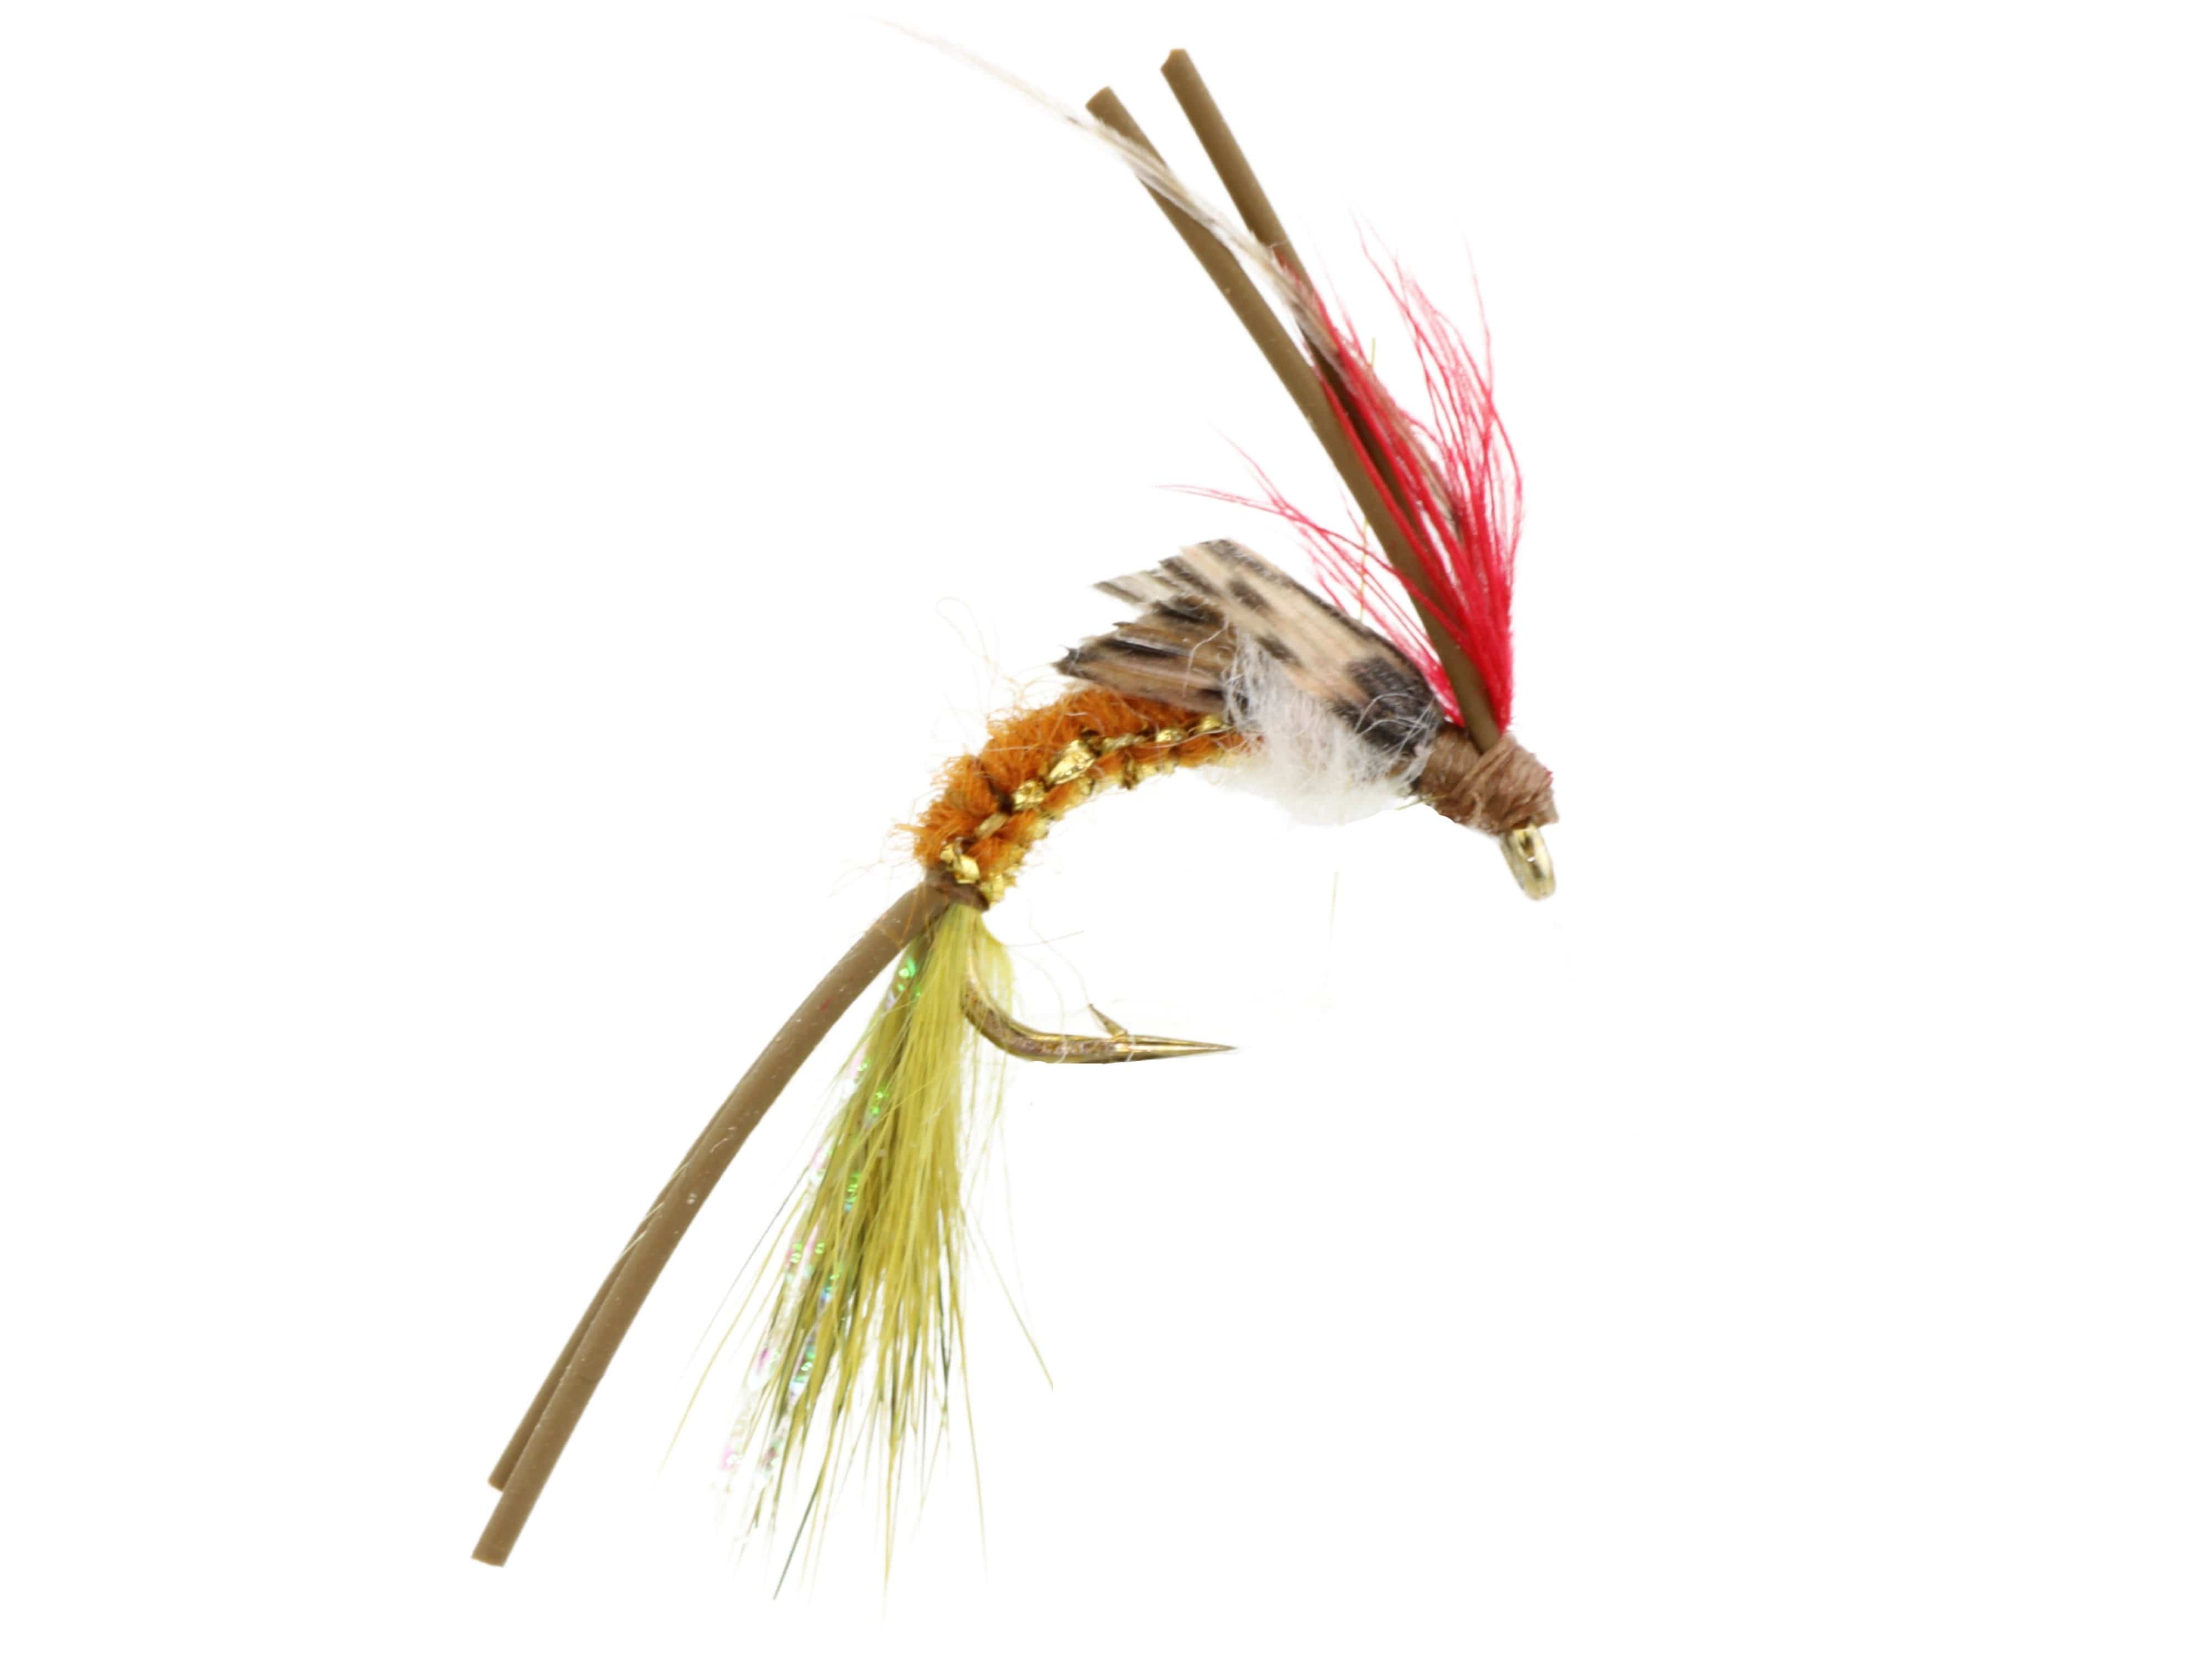 Wild Water Fly Fishing Woven Brown and Olive Caddis with Rubber Legs, Size 10, Qty. 6